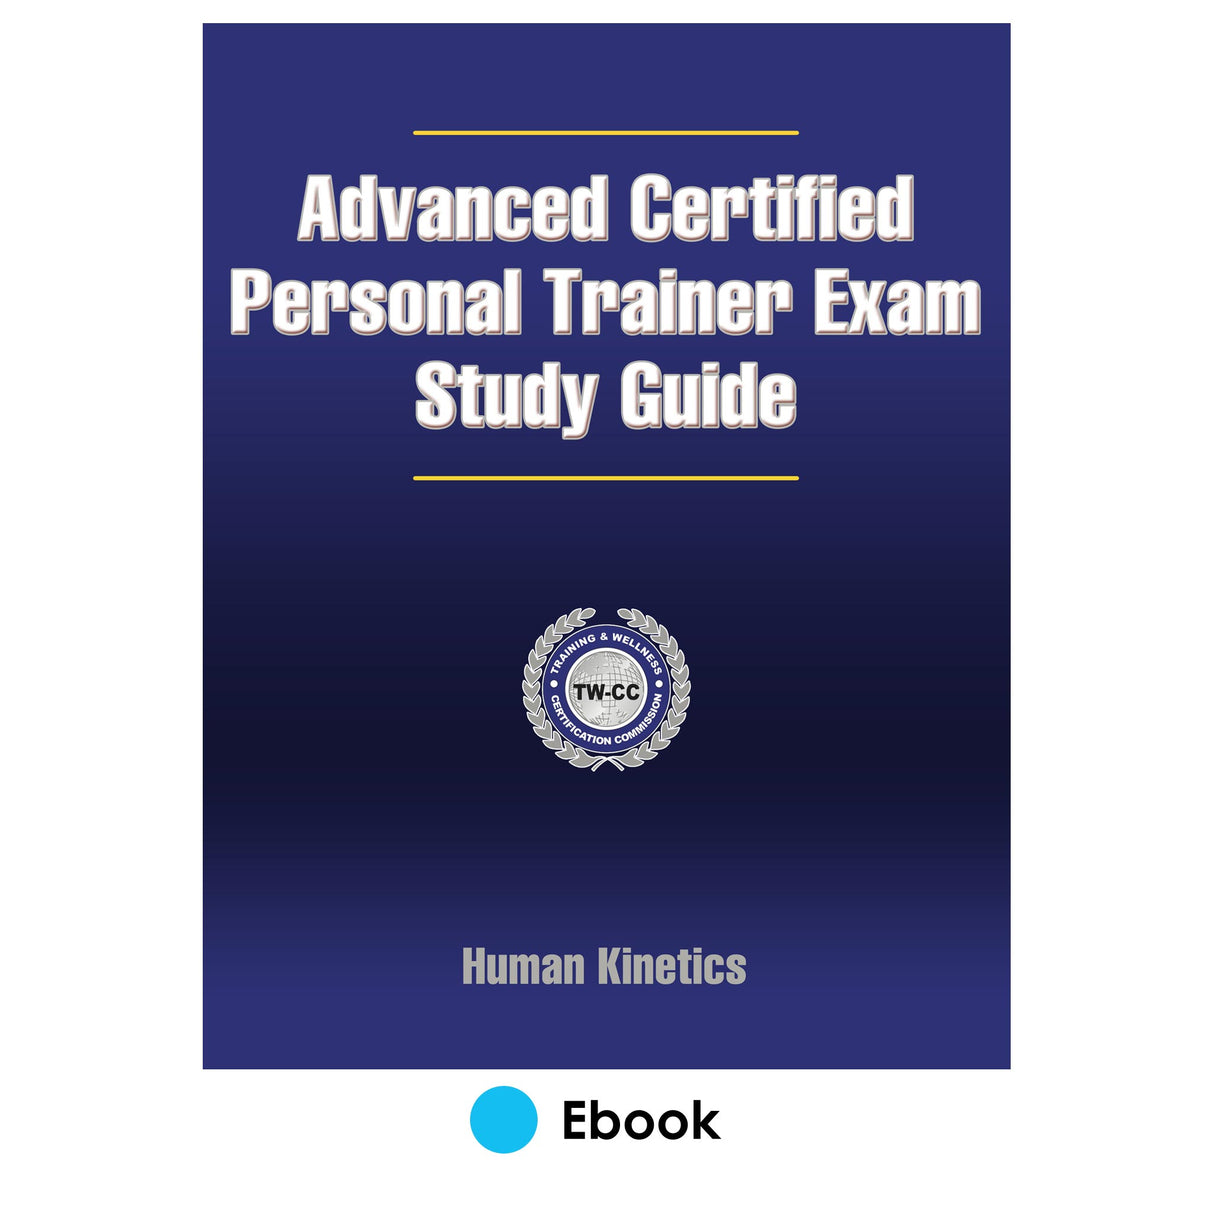 Advanced Certified Personal Trainer Exam Study Guide